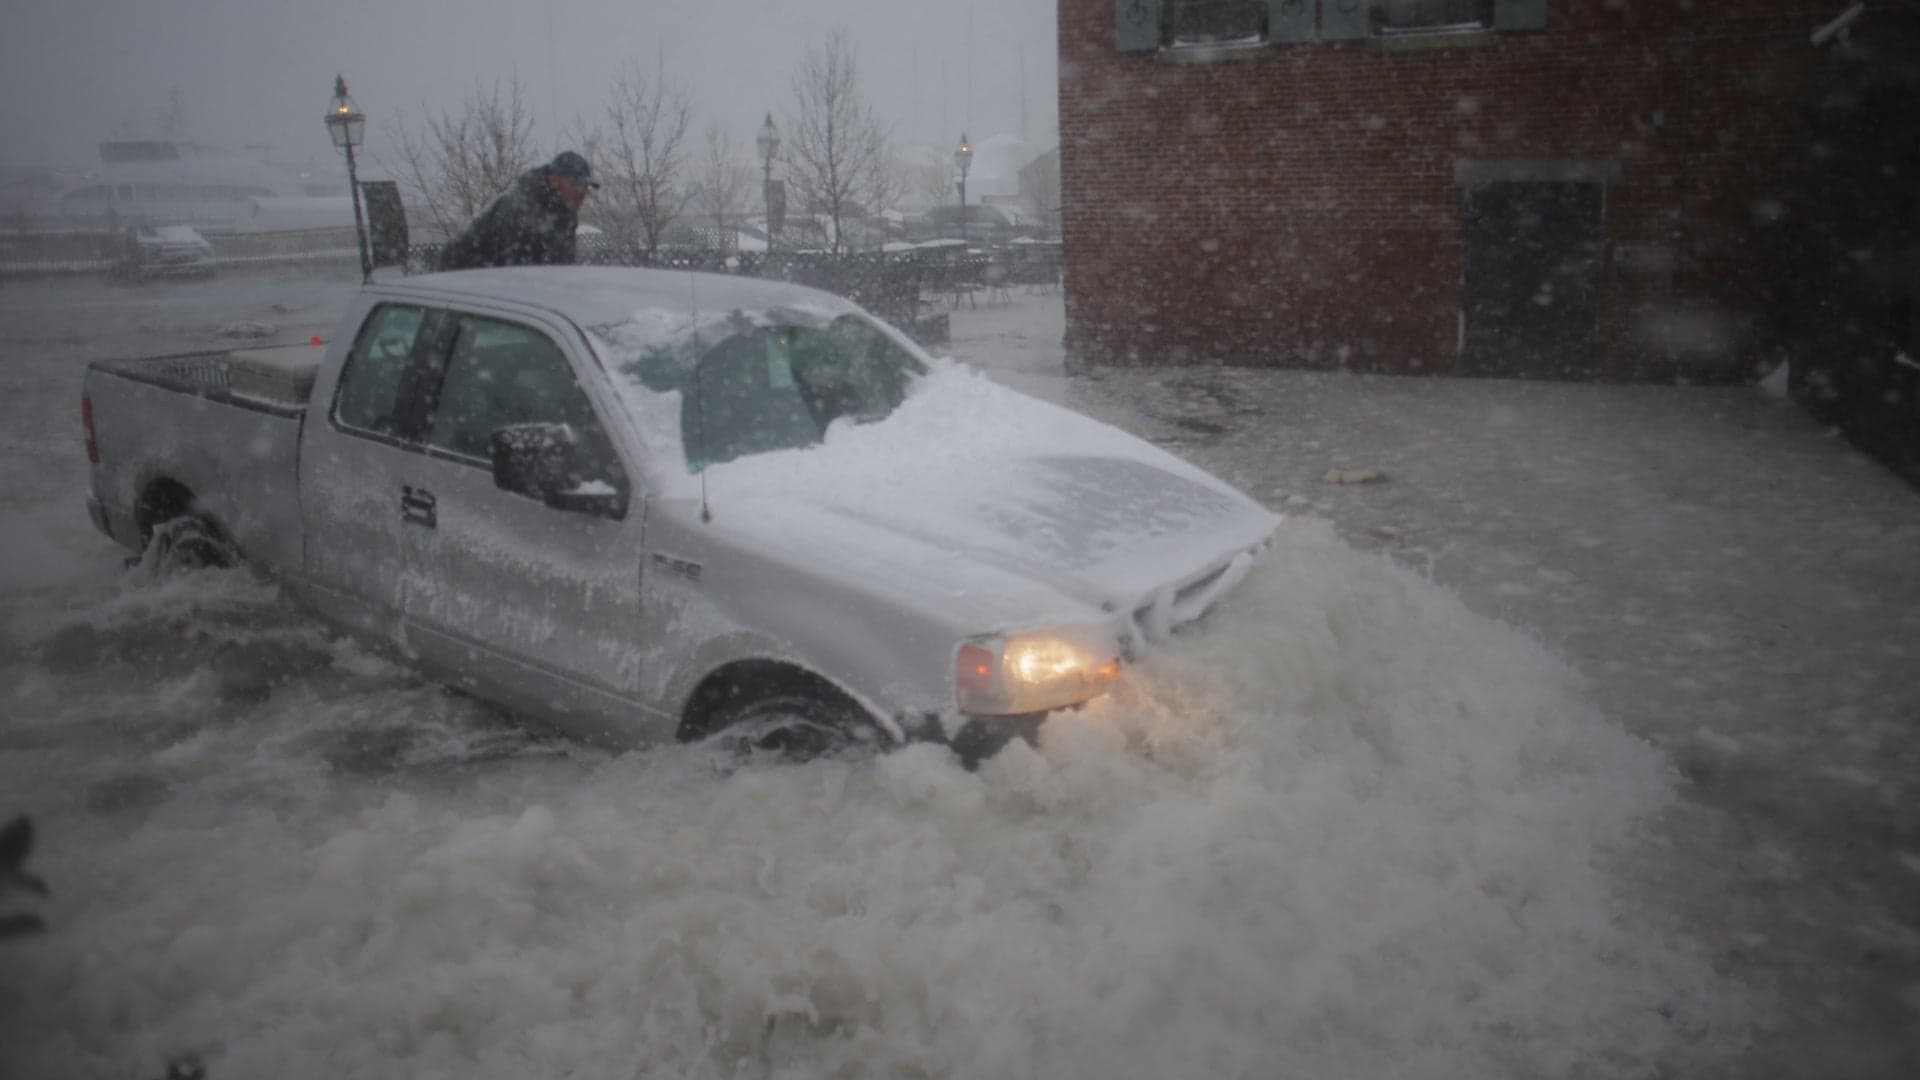 New York Senator Schumer Wants Stronger Consumer Protection From Flood Cars